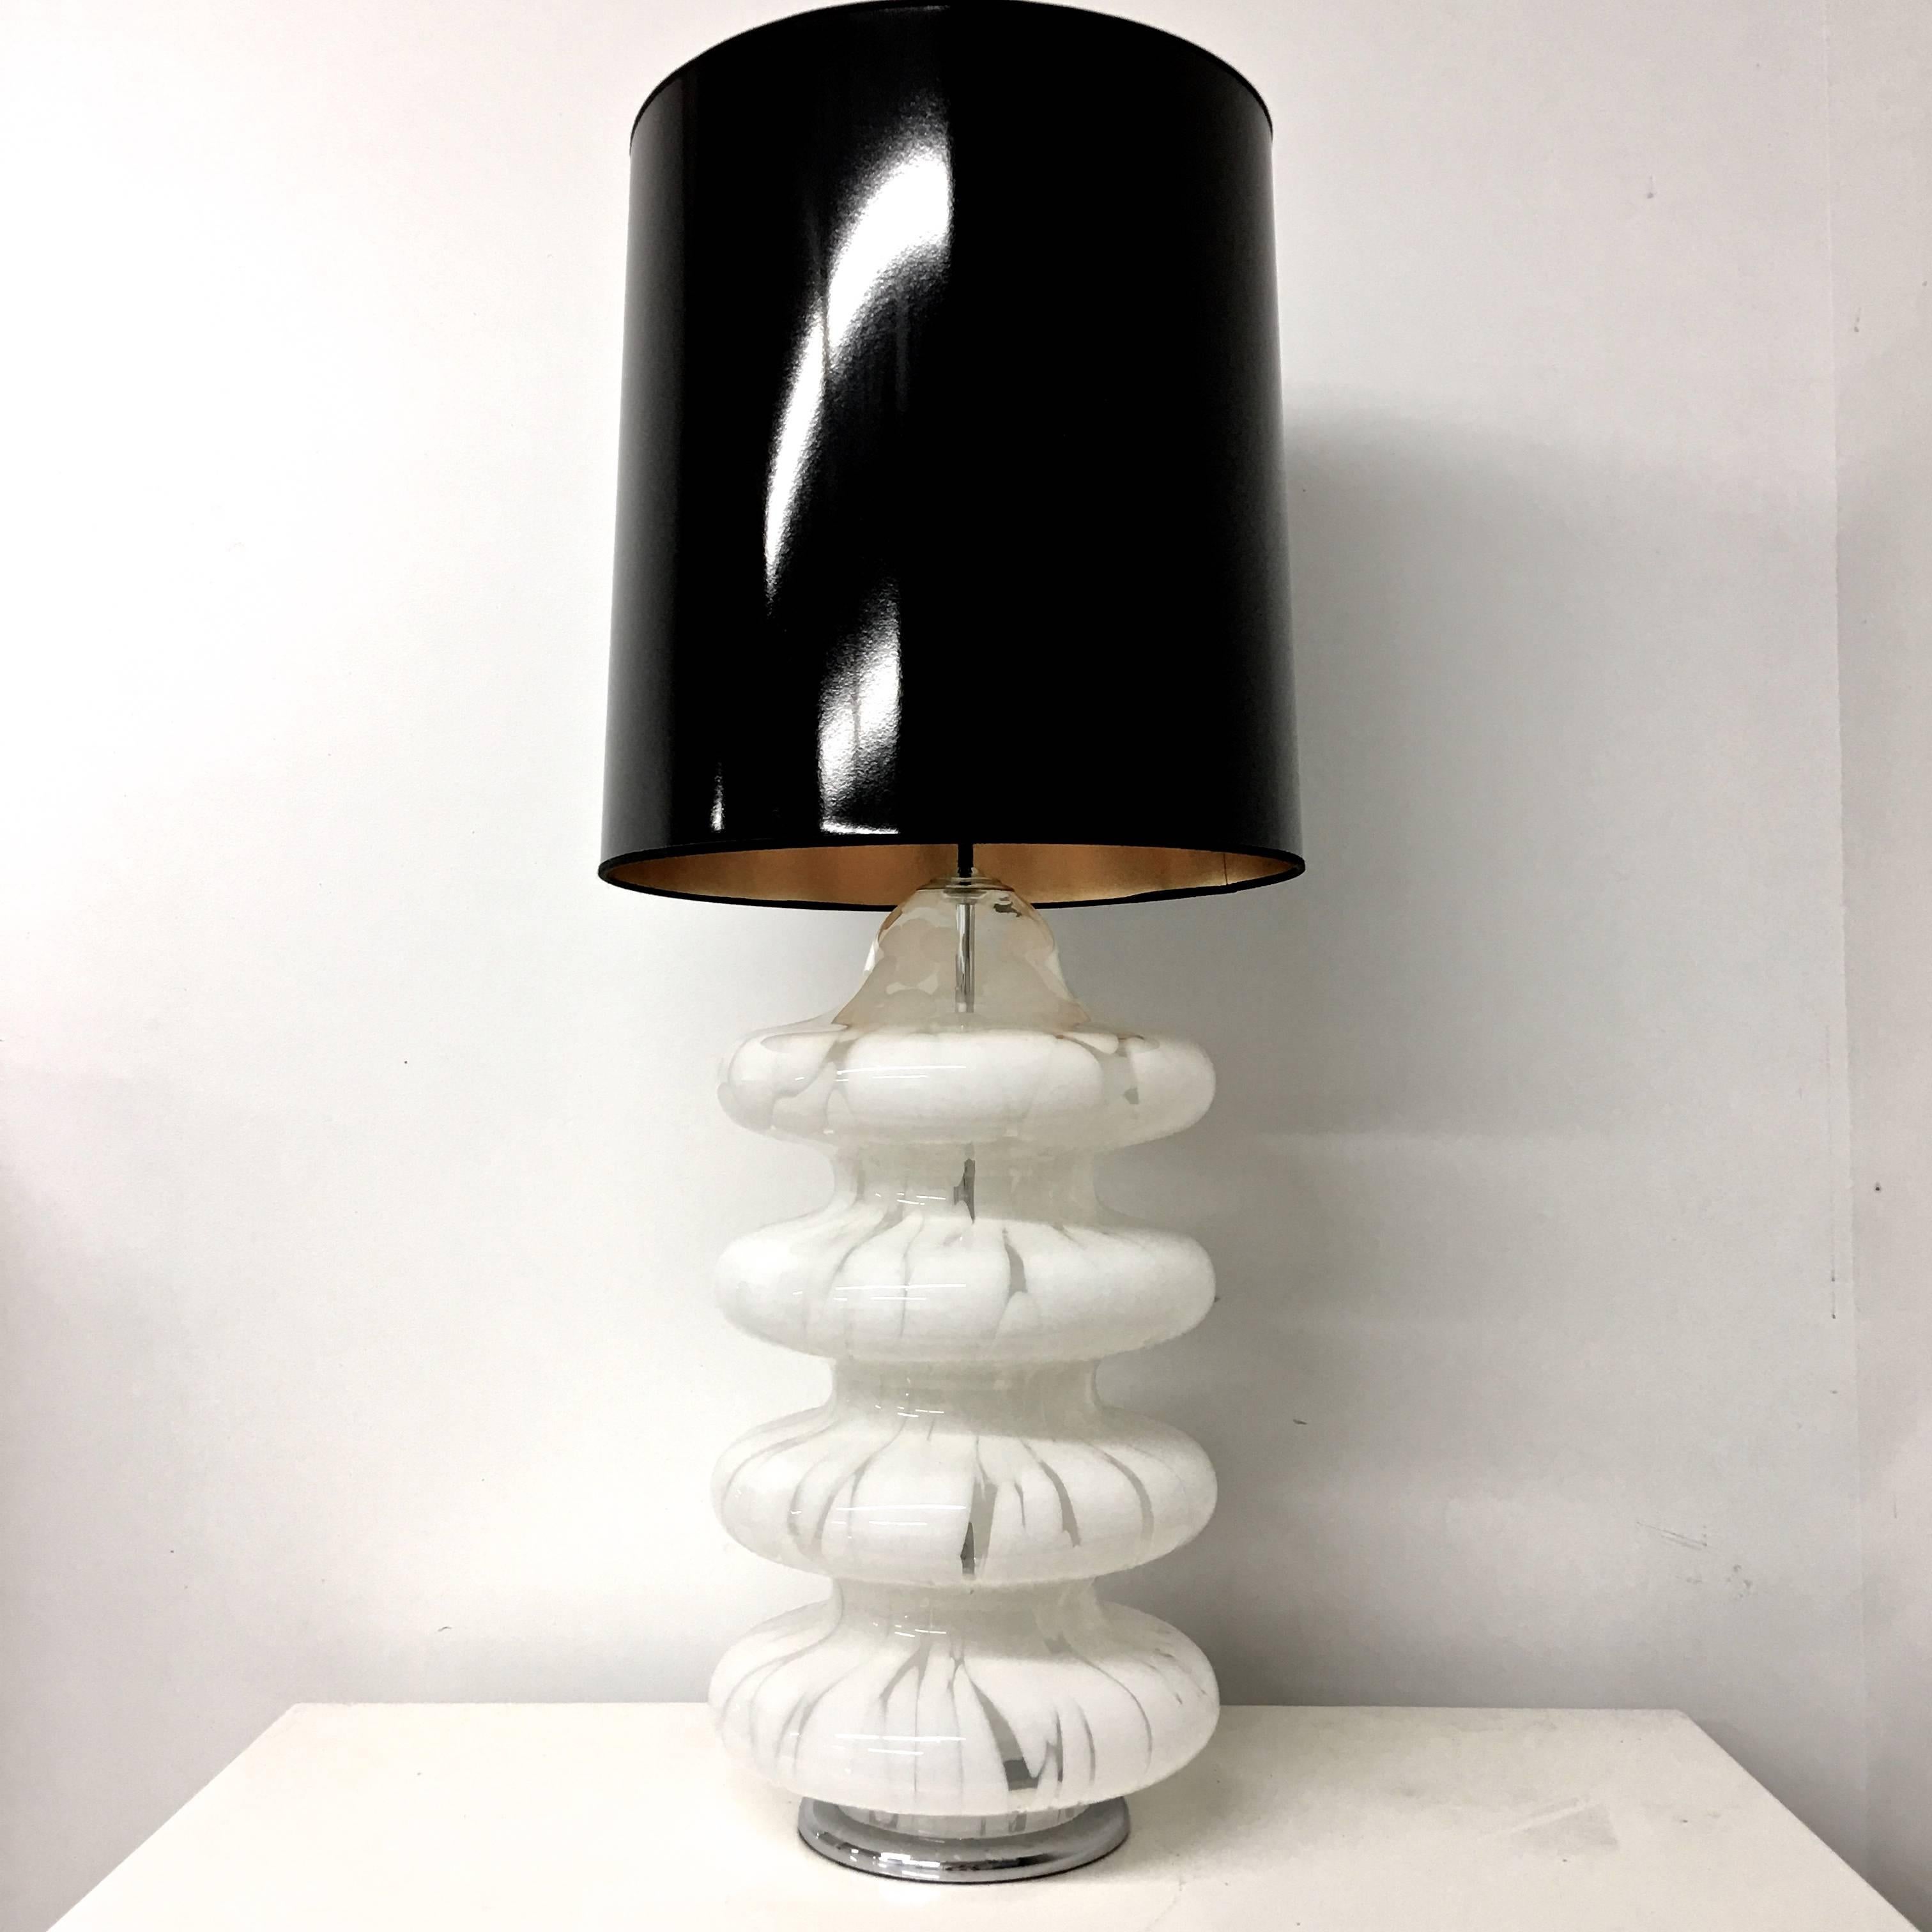 Four-tier pagoda form table lamp by Carlo Nason of Mazzega consisting of handblown Murano glass with white swirls amidst clear glass having a tortoiseshell effect. Nickel plated round base and lamping which include two standard size Edison screw